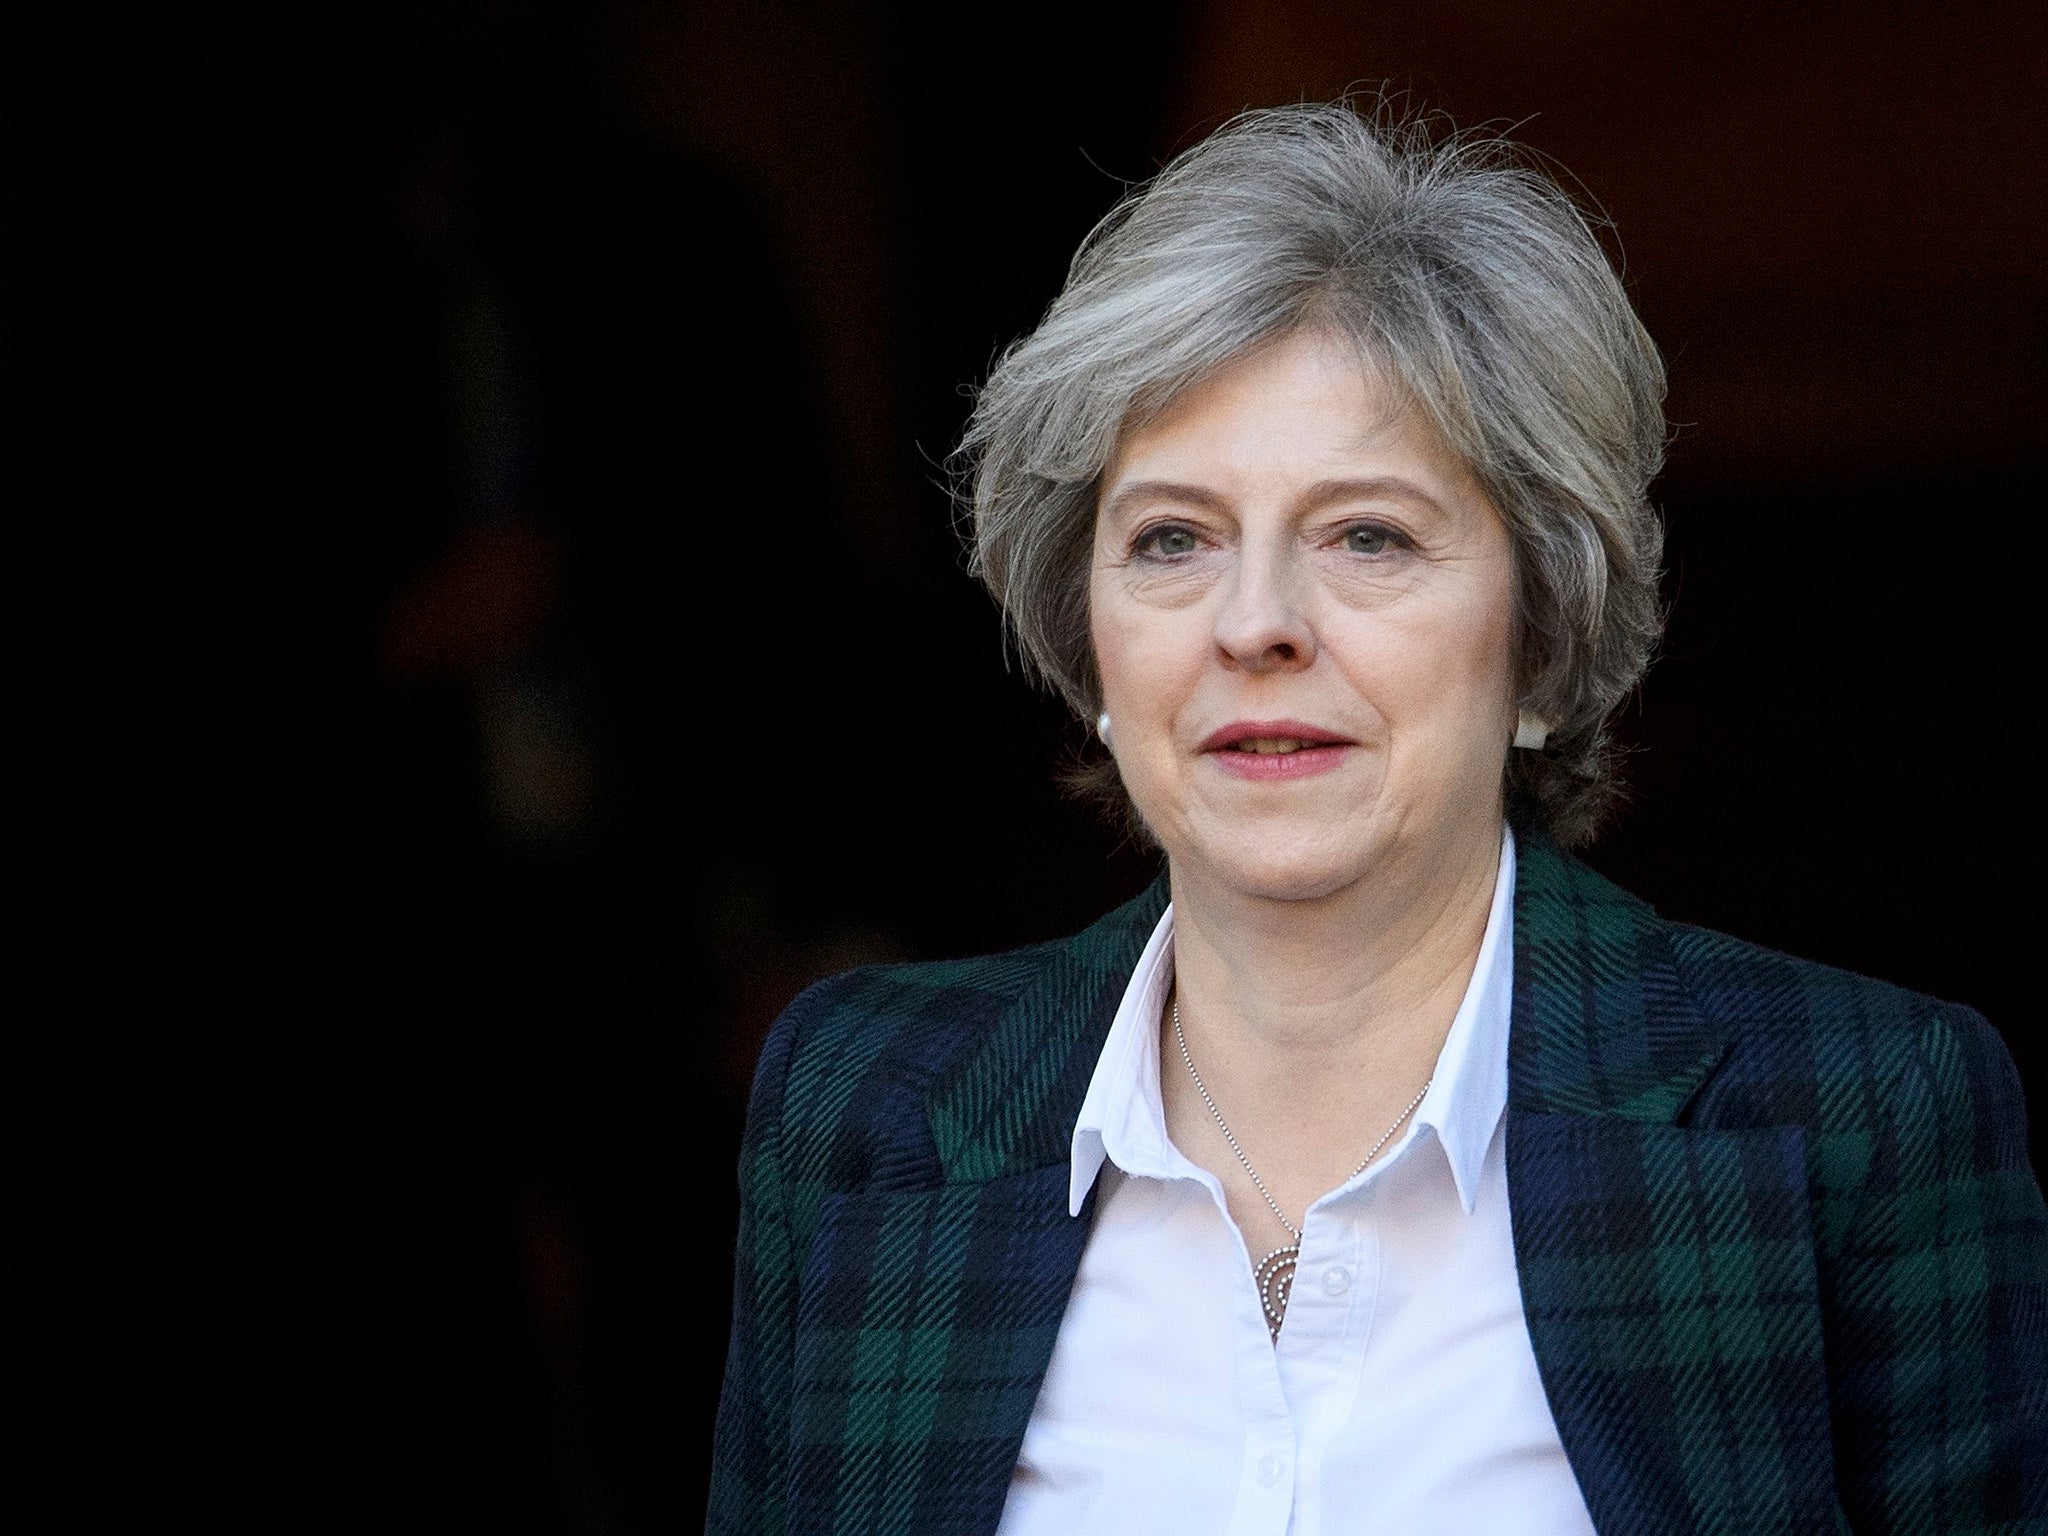 Prime Minister Theresa May will now seek to publish the details of the Brexit deal 'within days', after the Supreme Court ruling